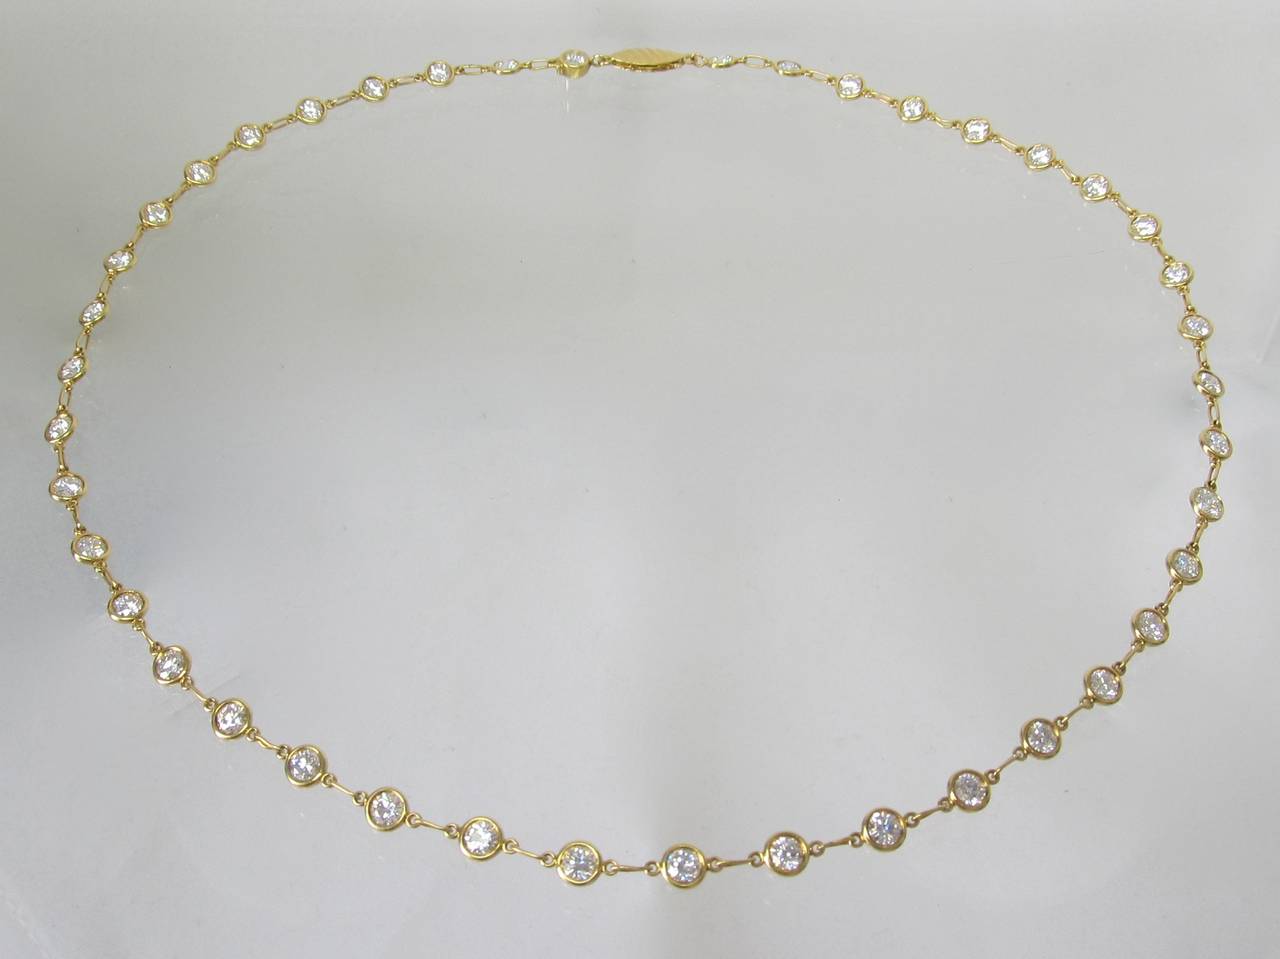 Classic, Elisa Peretti diamonds by yard necklace , with 42 brilliant diamonds set in 18k gold bezel style. Each diamond is 0.15 carats with the total diamond weight of 6.30 carats.
Color of the diamonds is E/F, clarity VS
Length of the necklace is